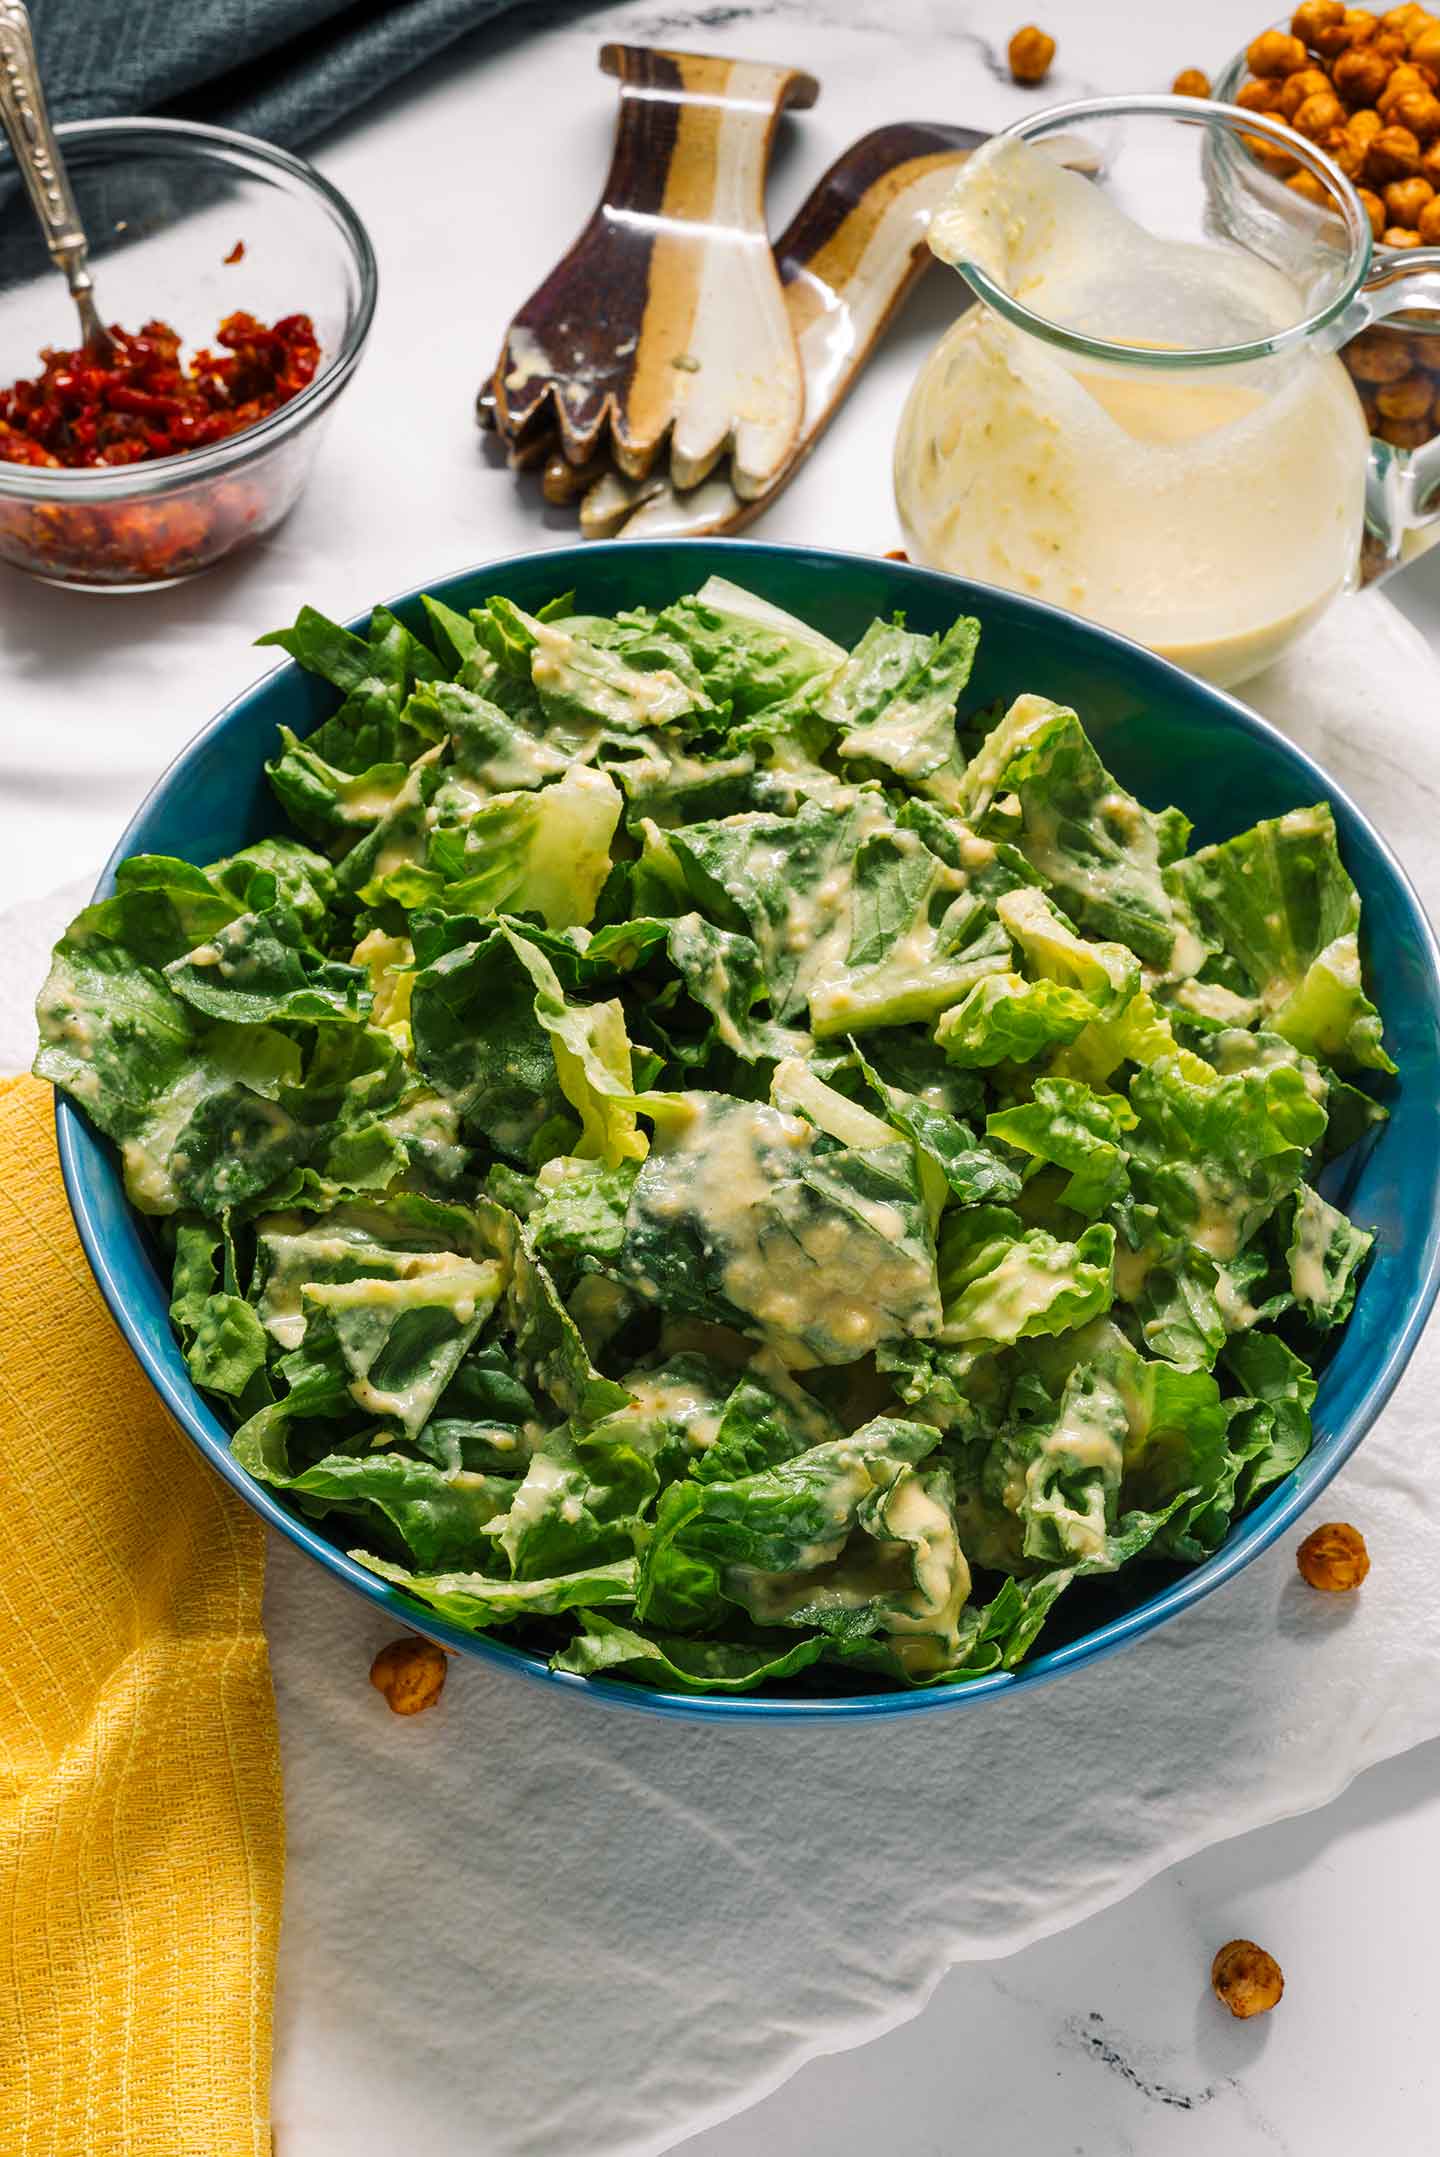 Top down view of romaine lettuce dressed with a creamy dairy-free caesar dressing. Leftover dressing fills a jar nearby.